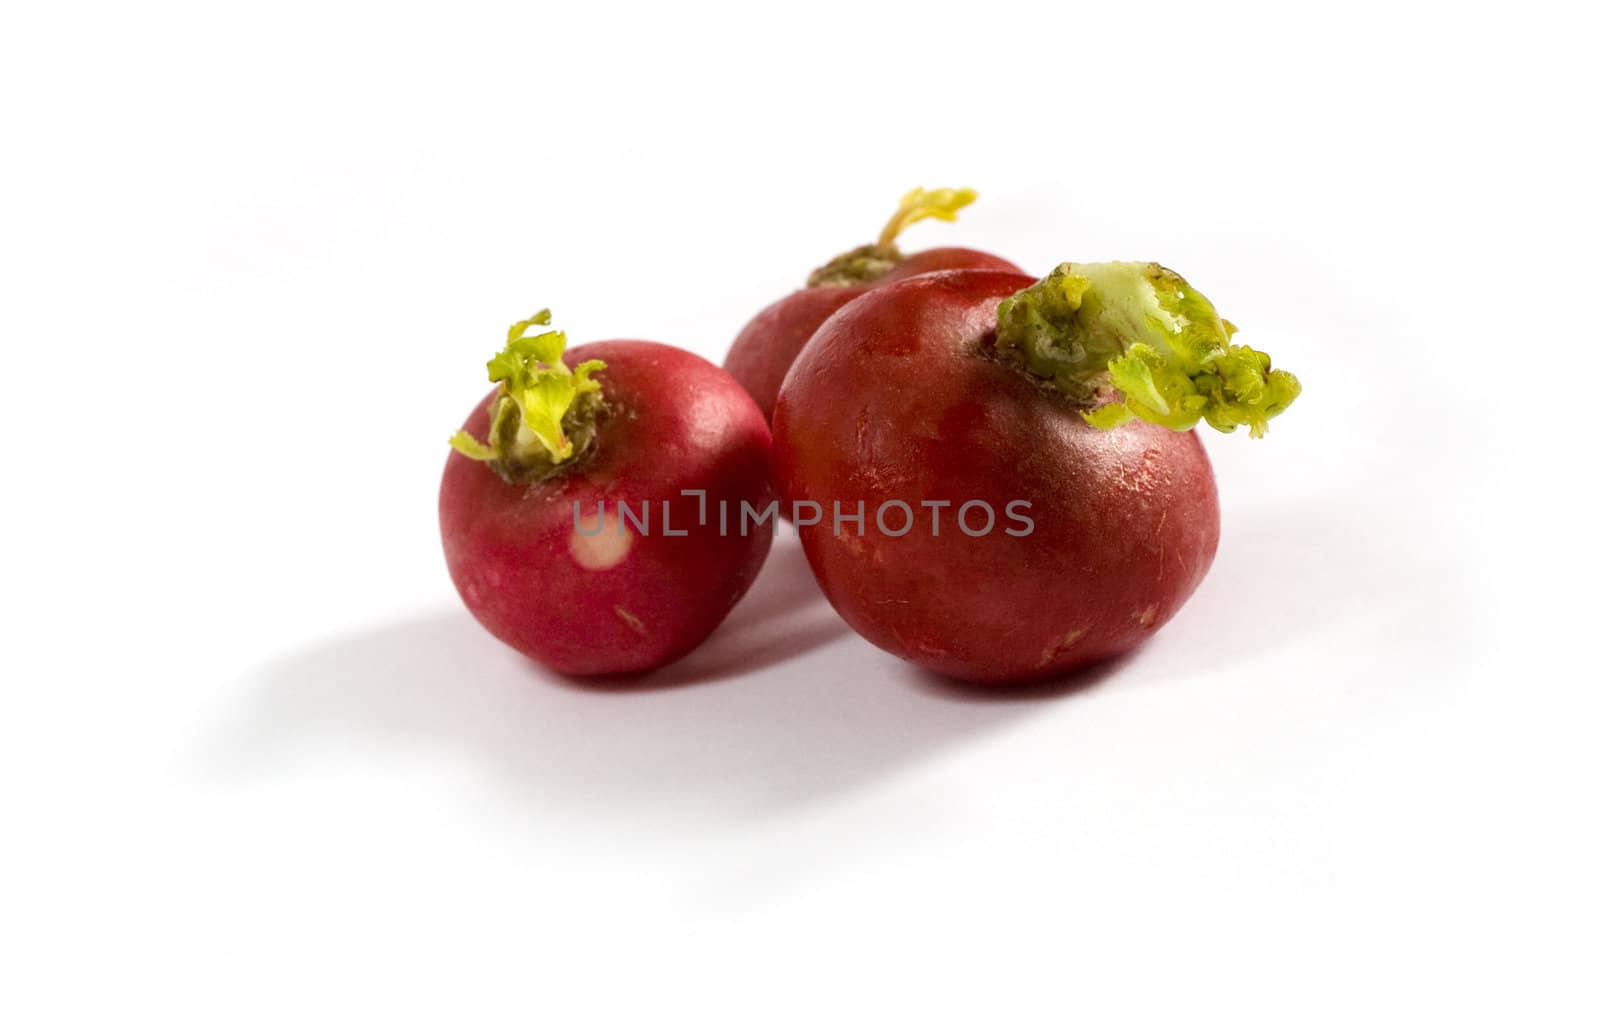 Three radishes on a white background by ints